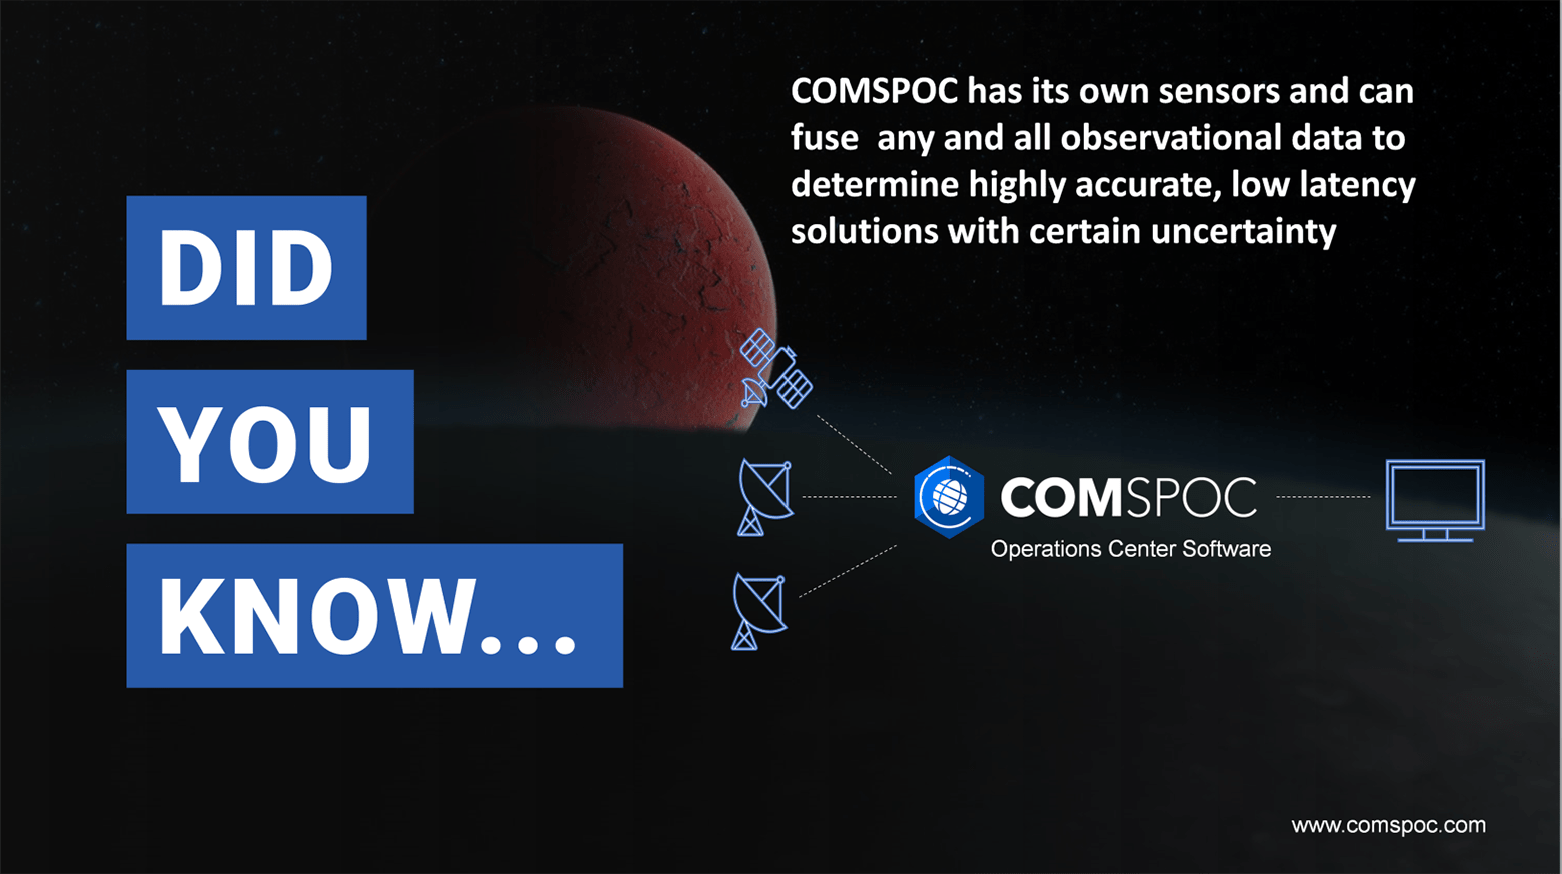 Did You Know: COMSPOC has it's own sensors.